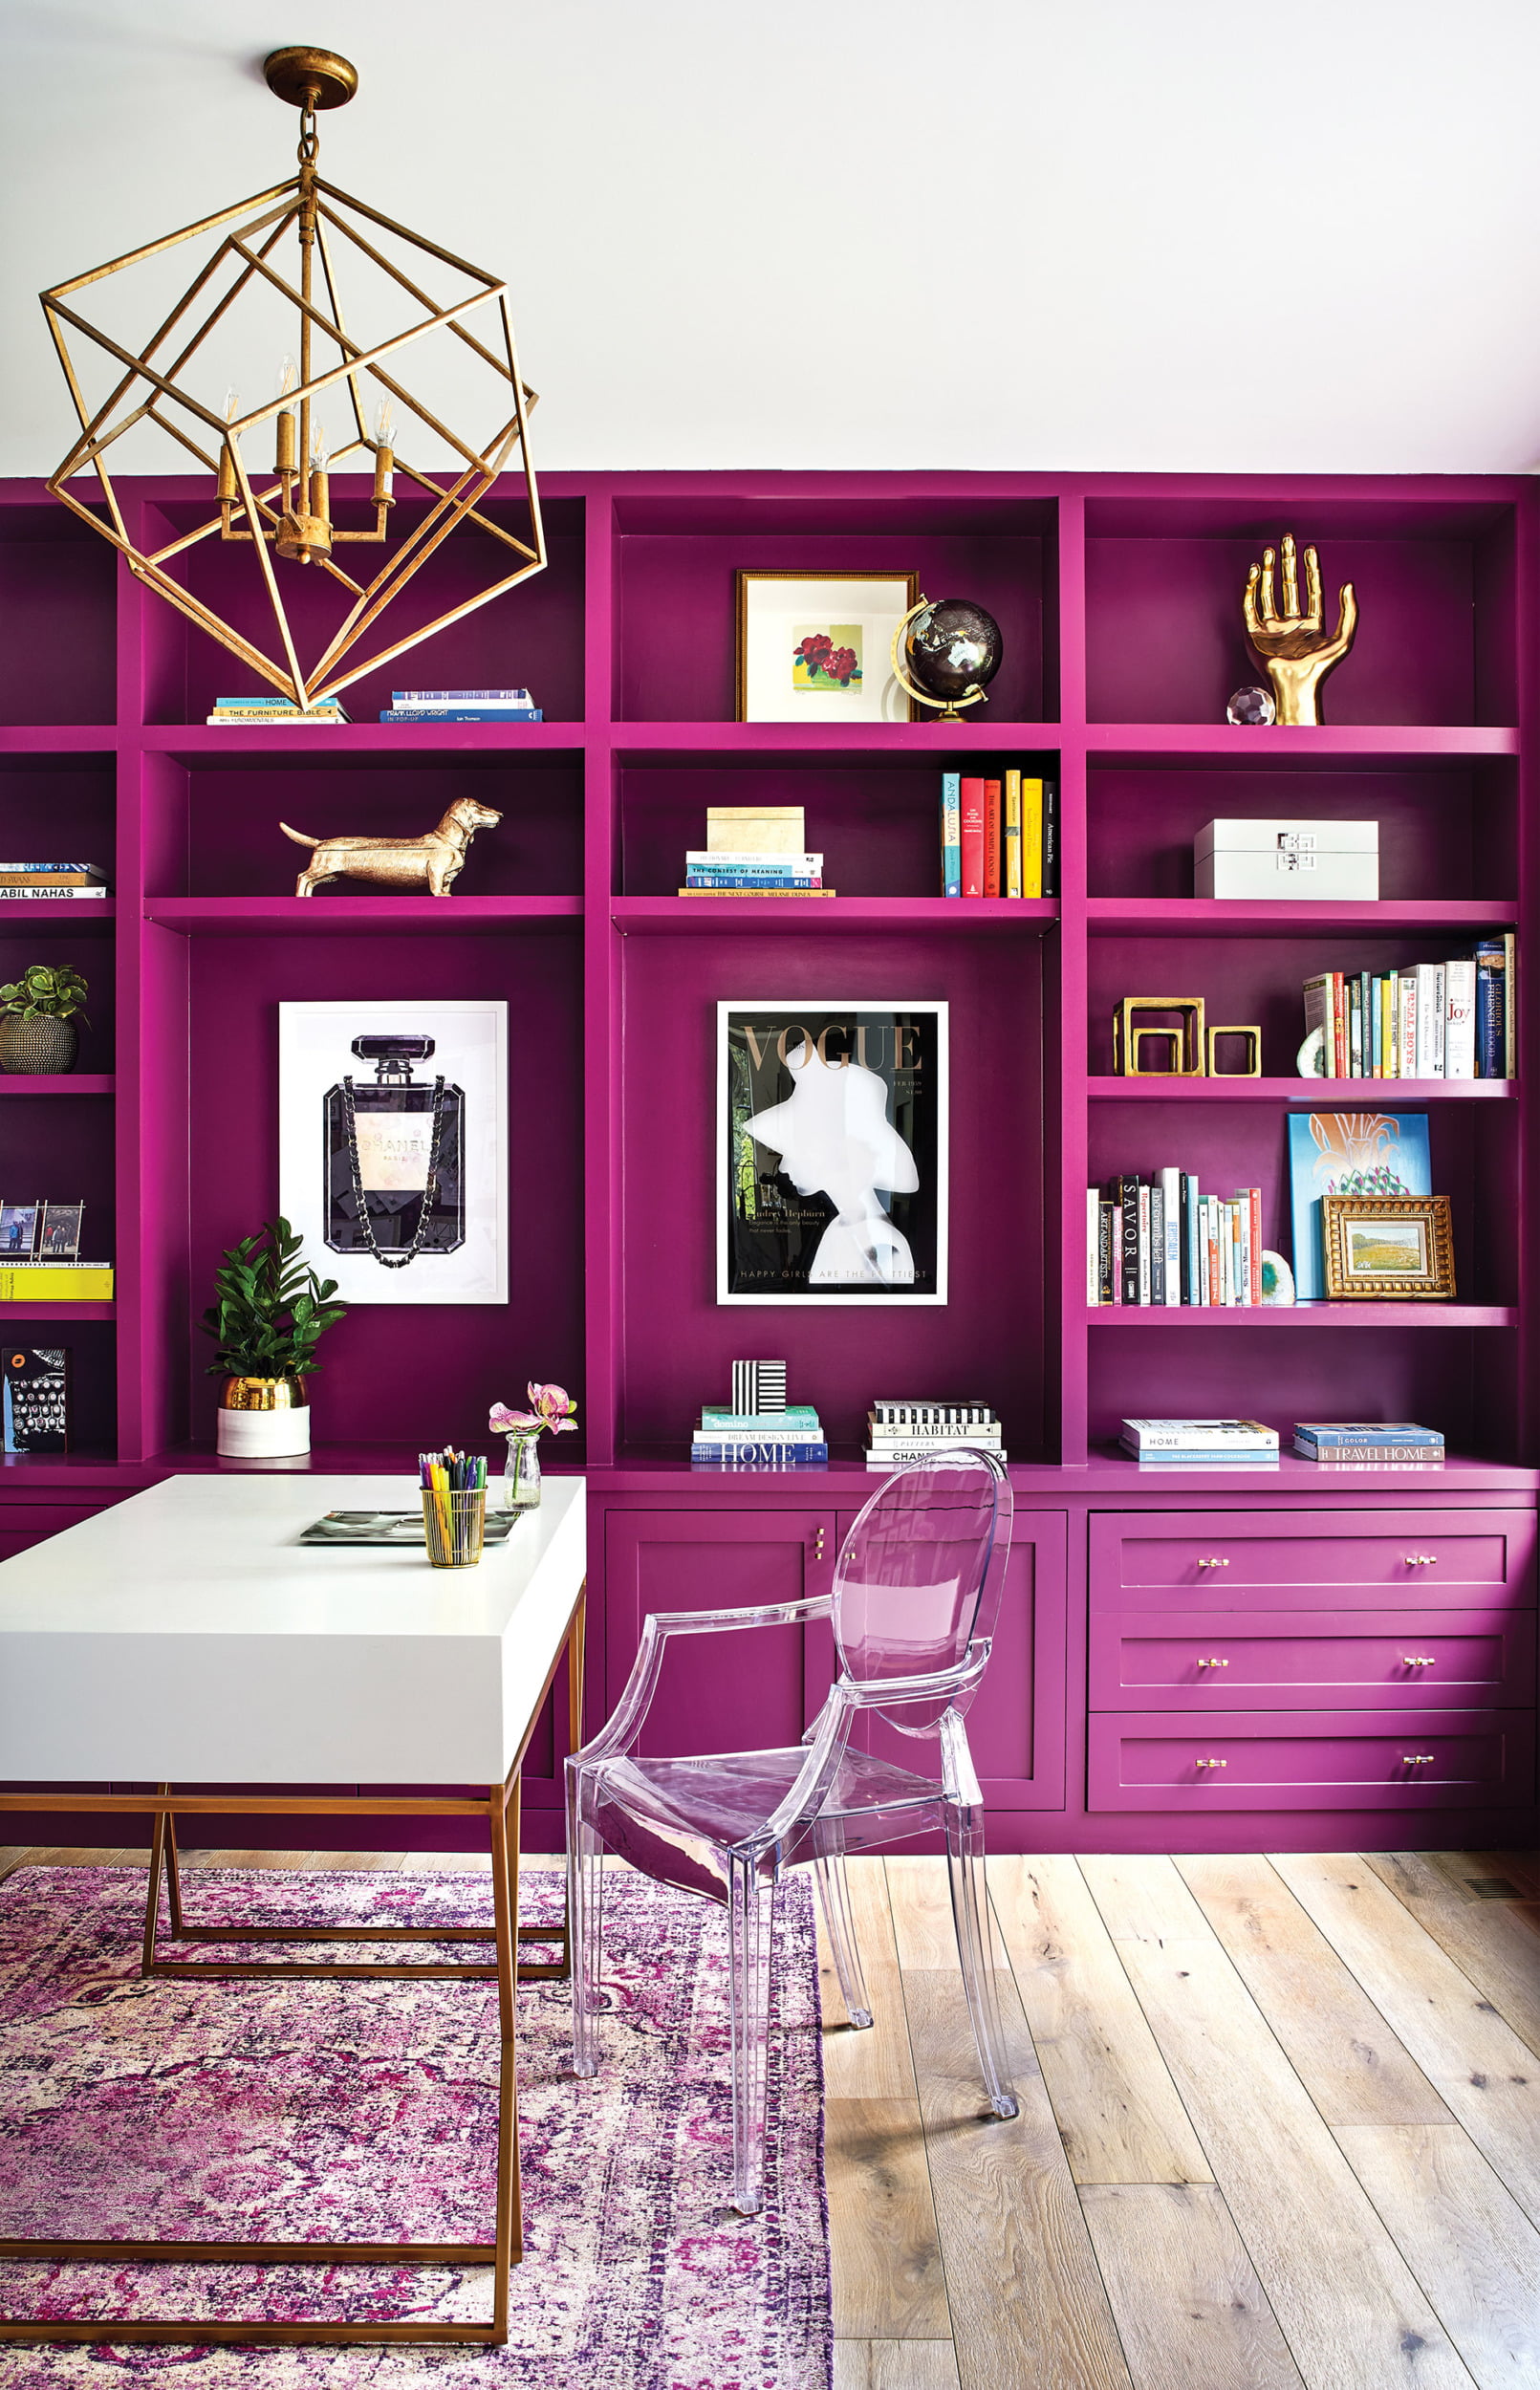 Bright-pink home office features chic writing desk and acrylic chair atop a colorful rug.